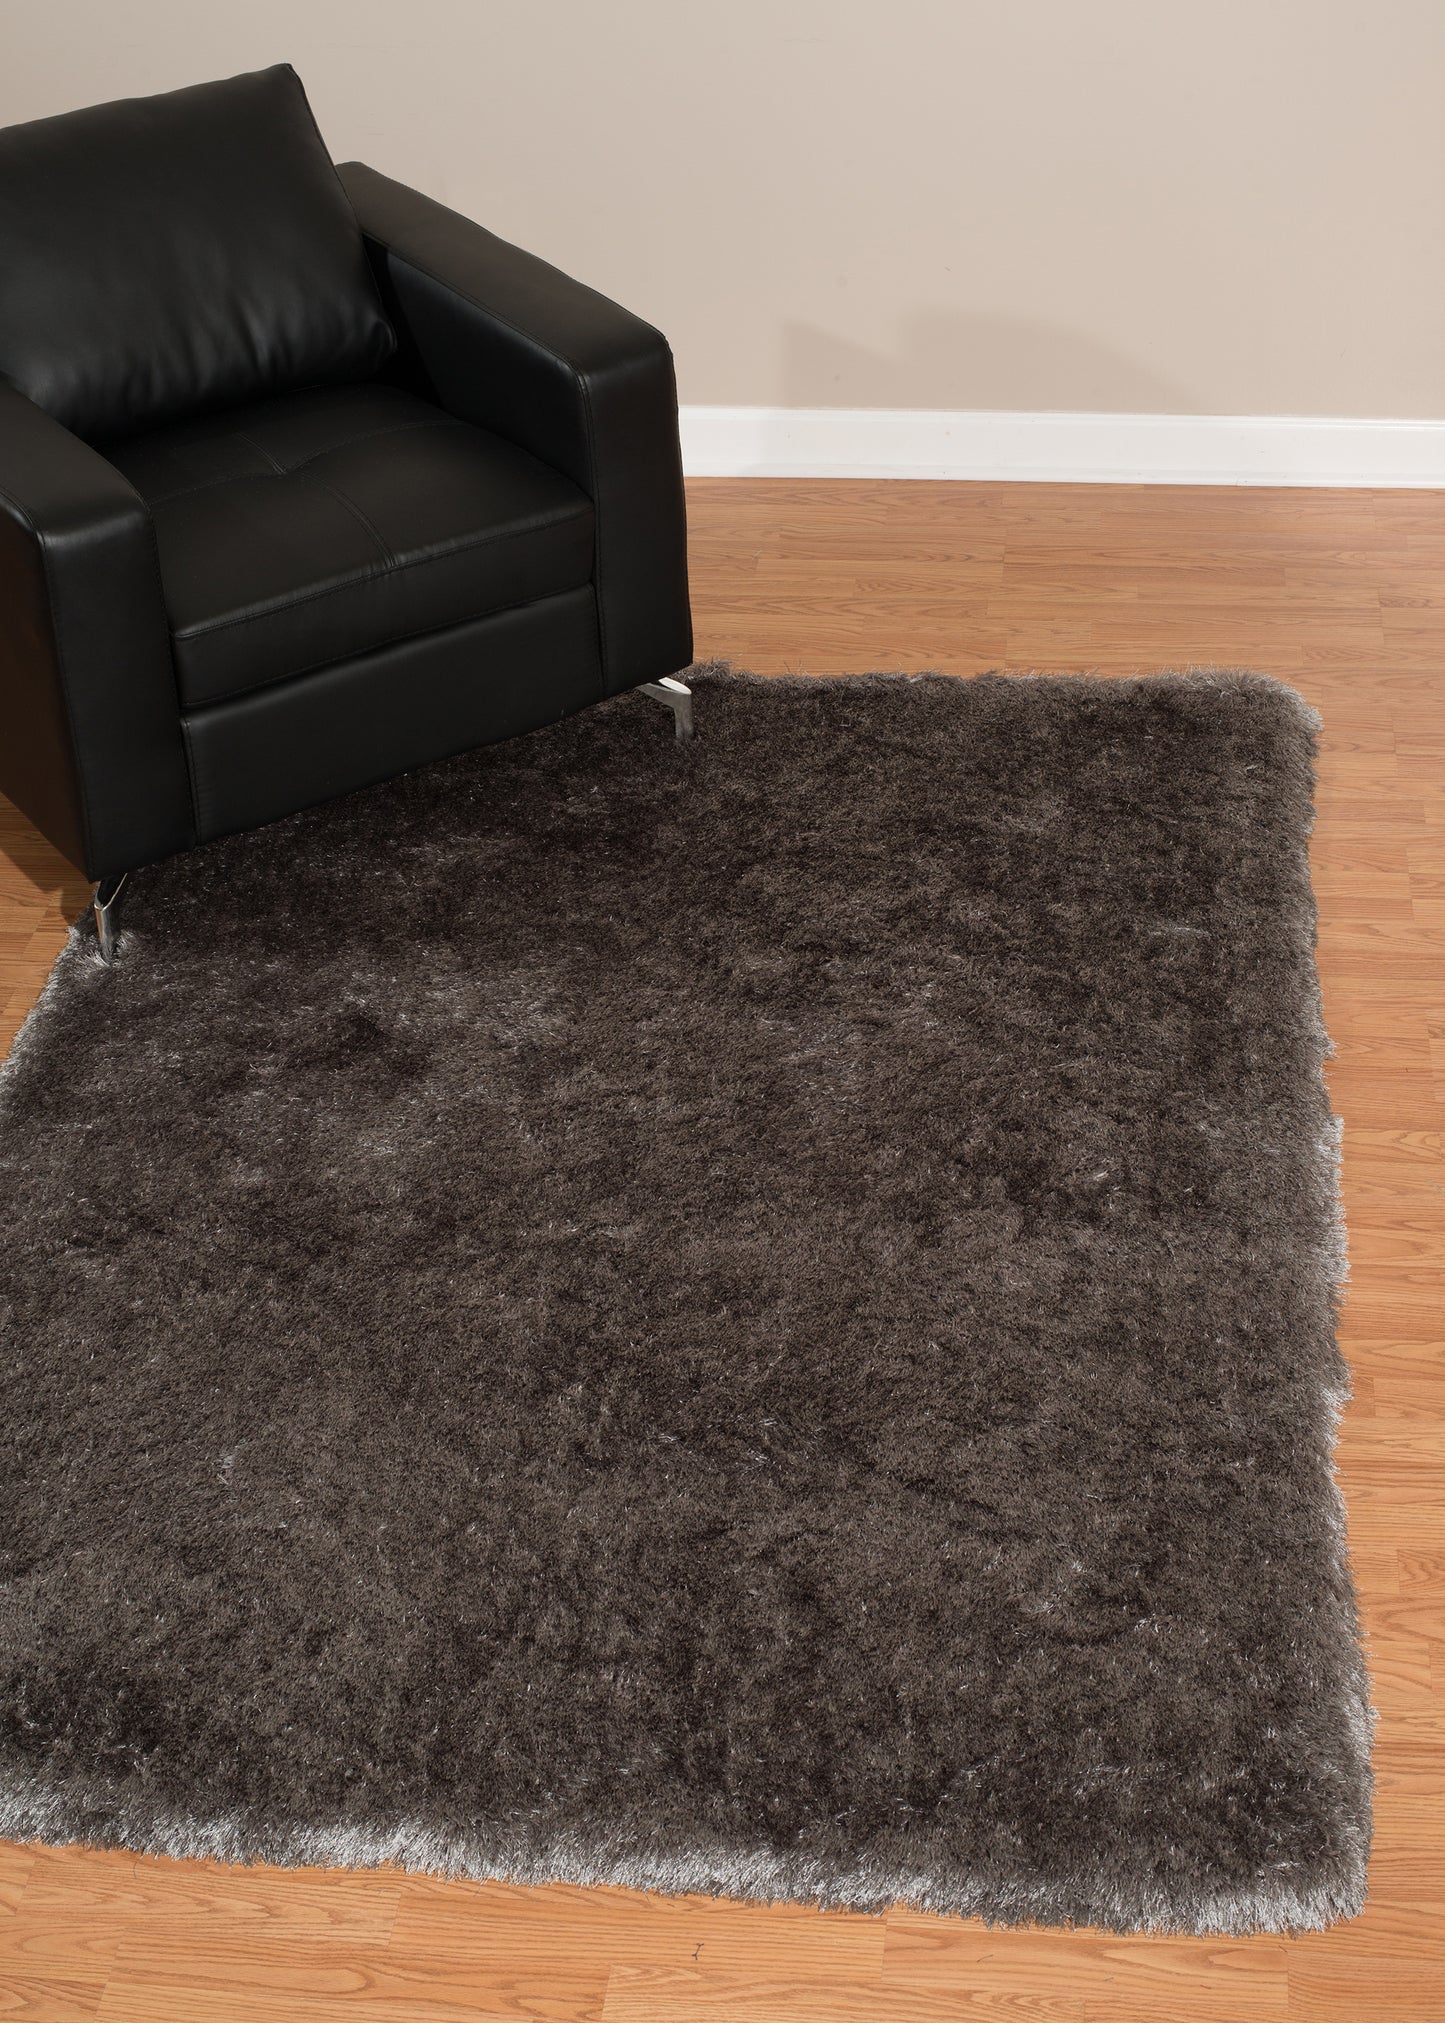 2300-Mira Synthetic Blend Indoor Area Rug by United Weavers